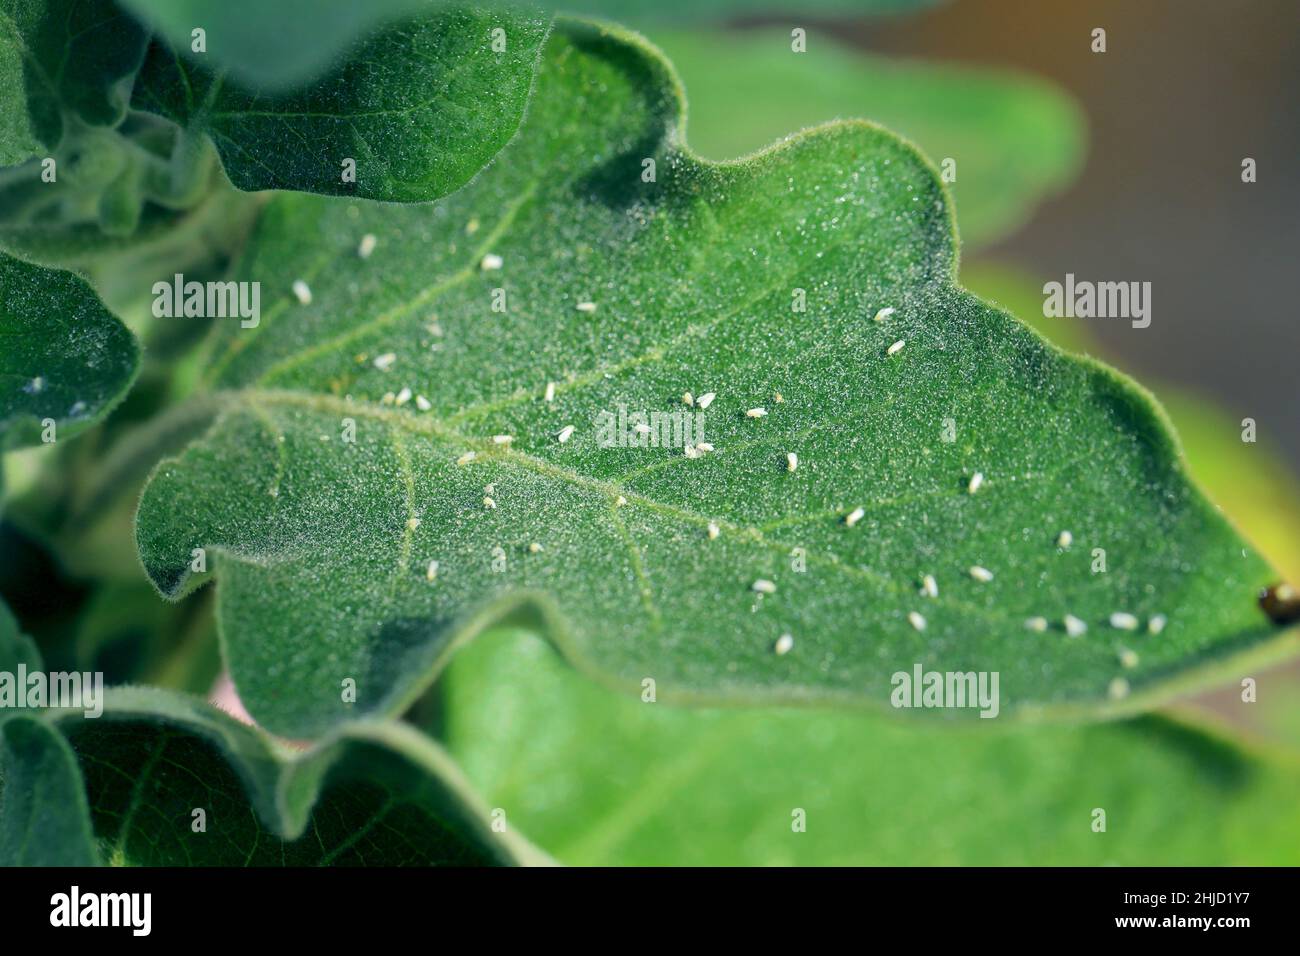 Silverleaf whitefly, Bemisia tabaci (Hemiptera: Aleyrodidae) killed by an insecticide made from natural oils on a leaf. Stock Photo